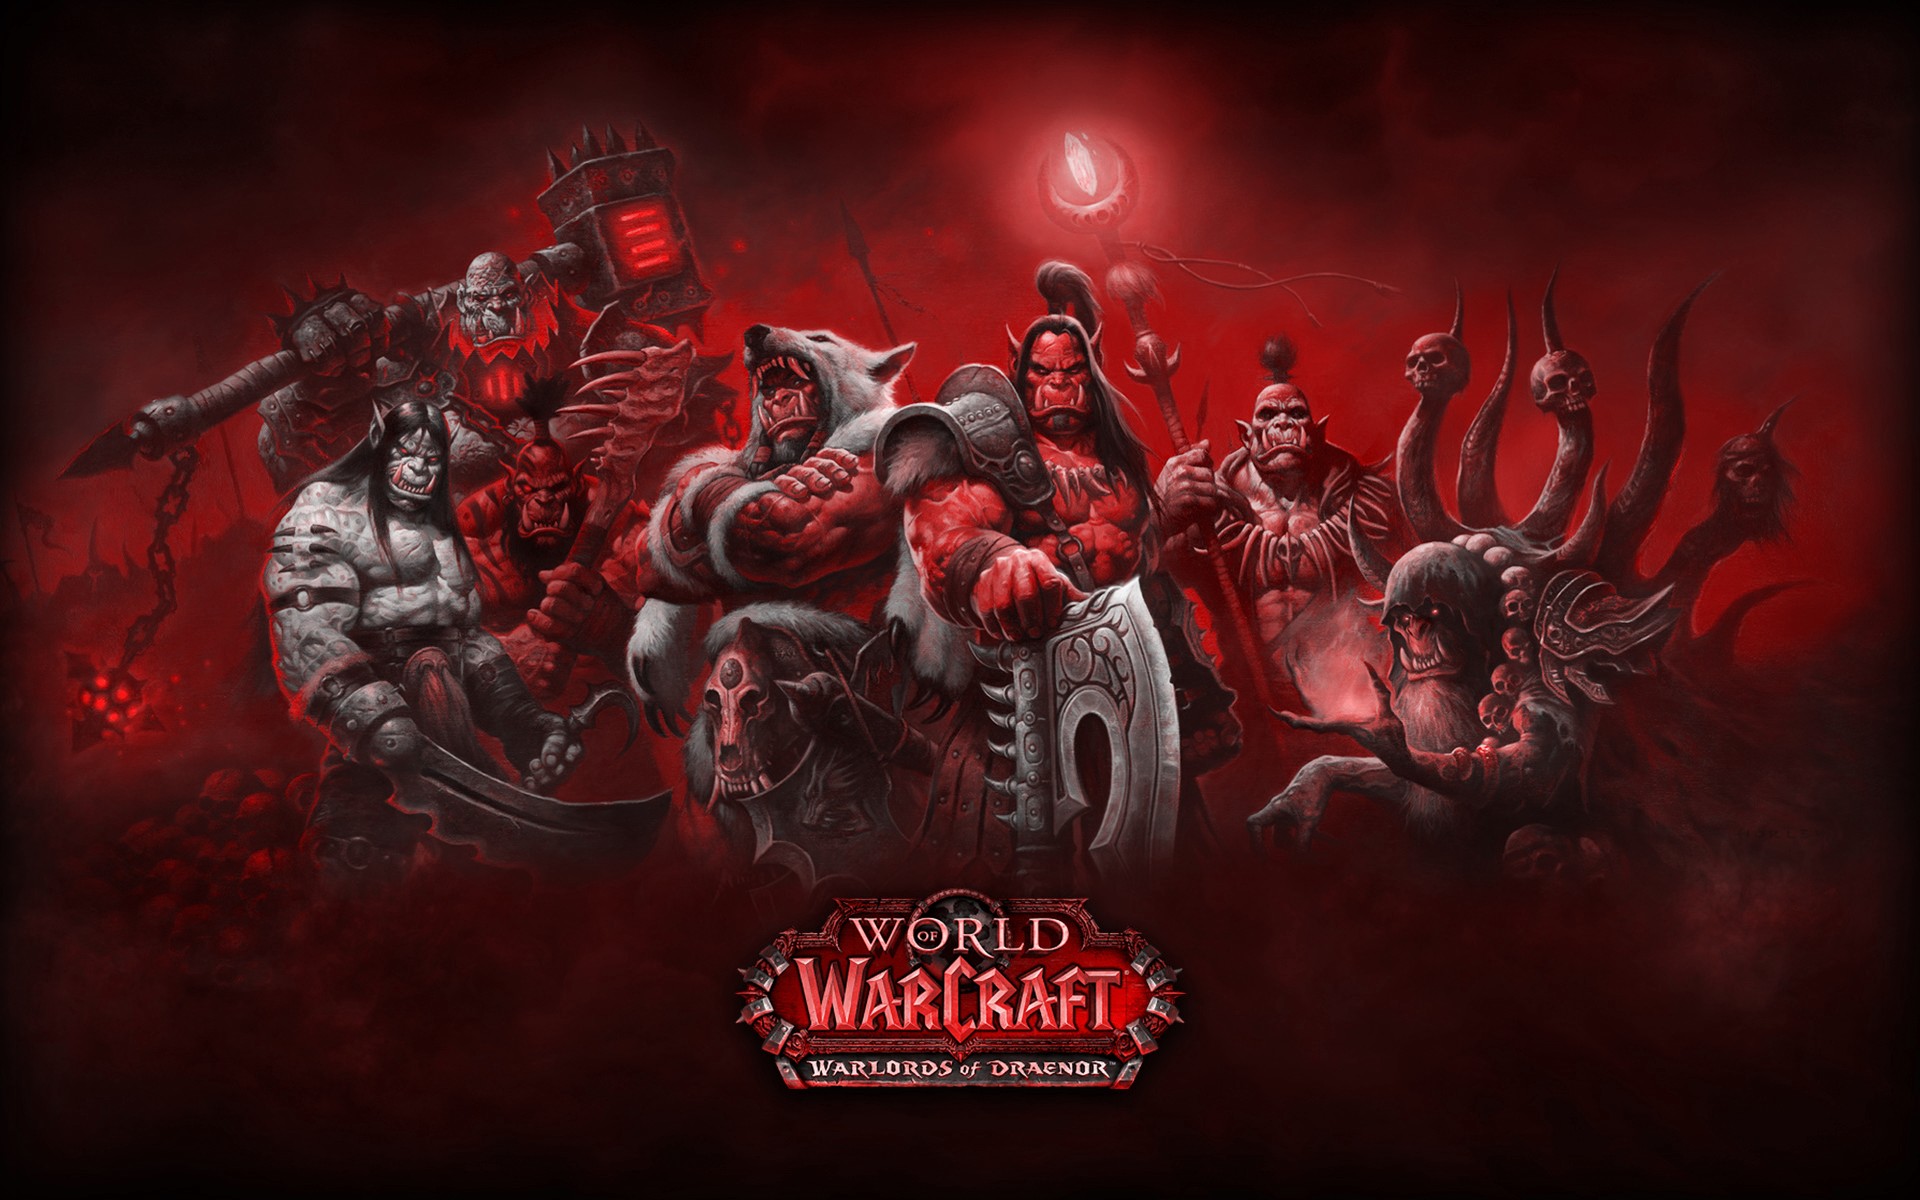 world of warcraft, video game, world of warcraft: warlords of draenor